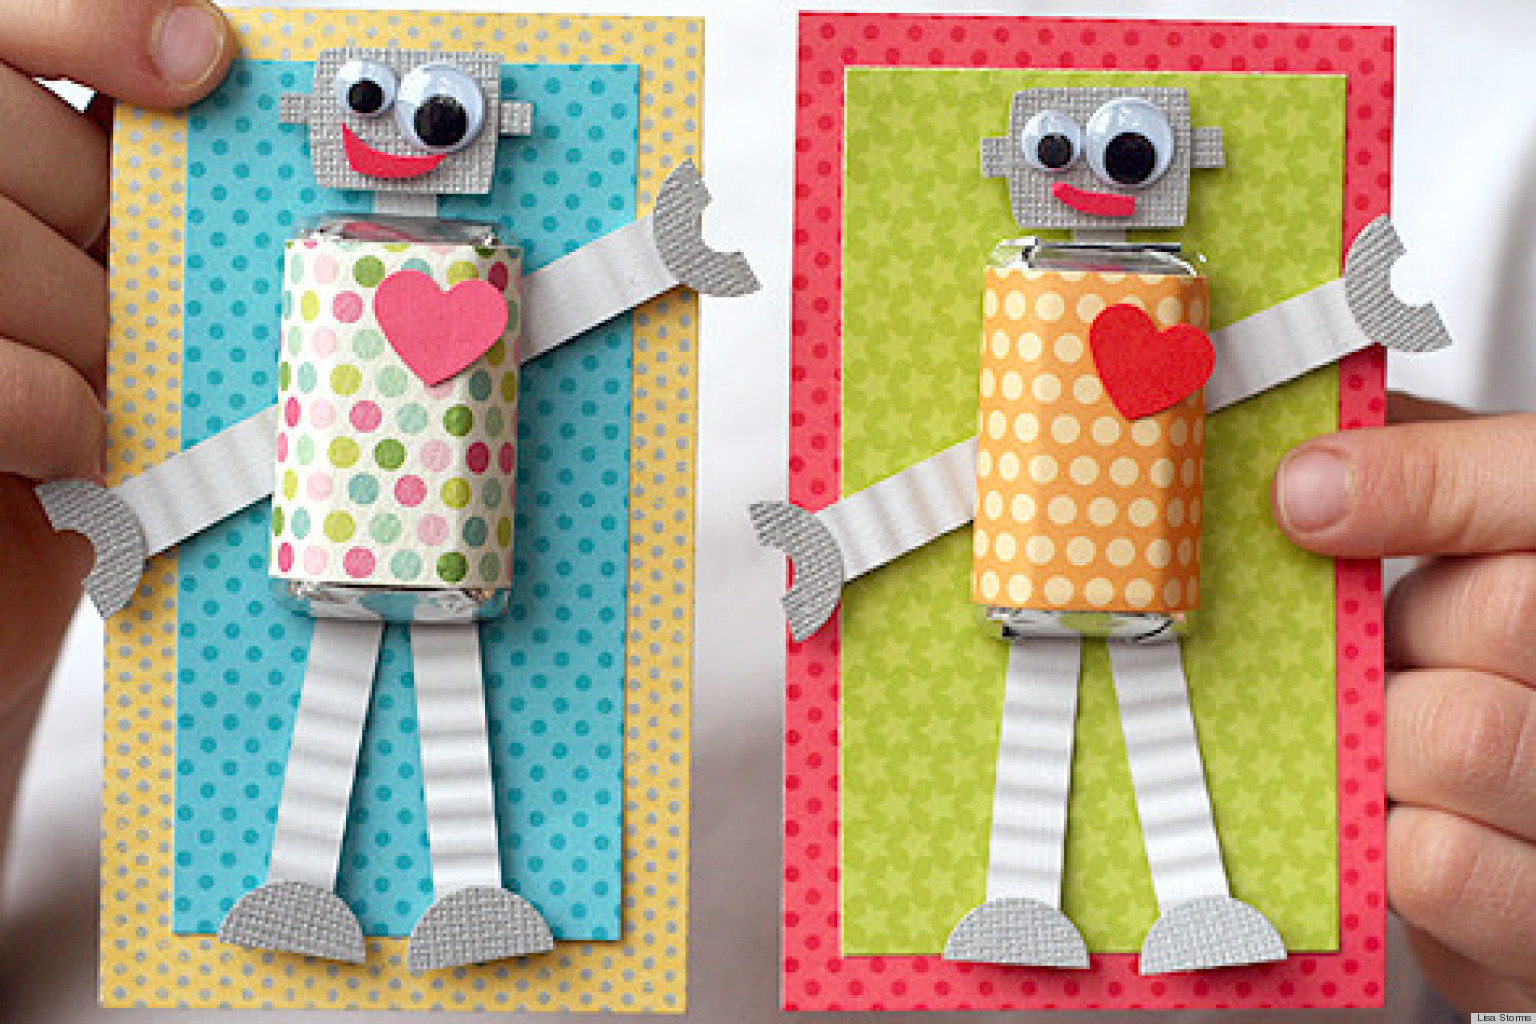 Robot Crafts For Kids
 Valentine s Day Ideas Make These Adorable DIY Robot Cards